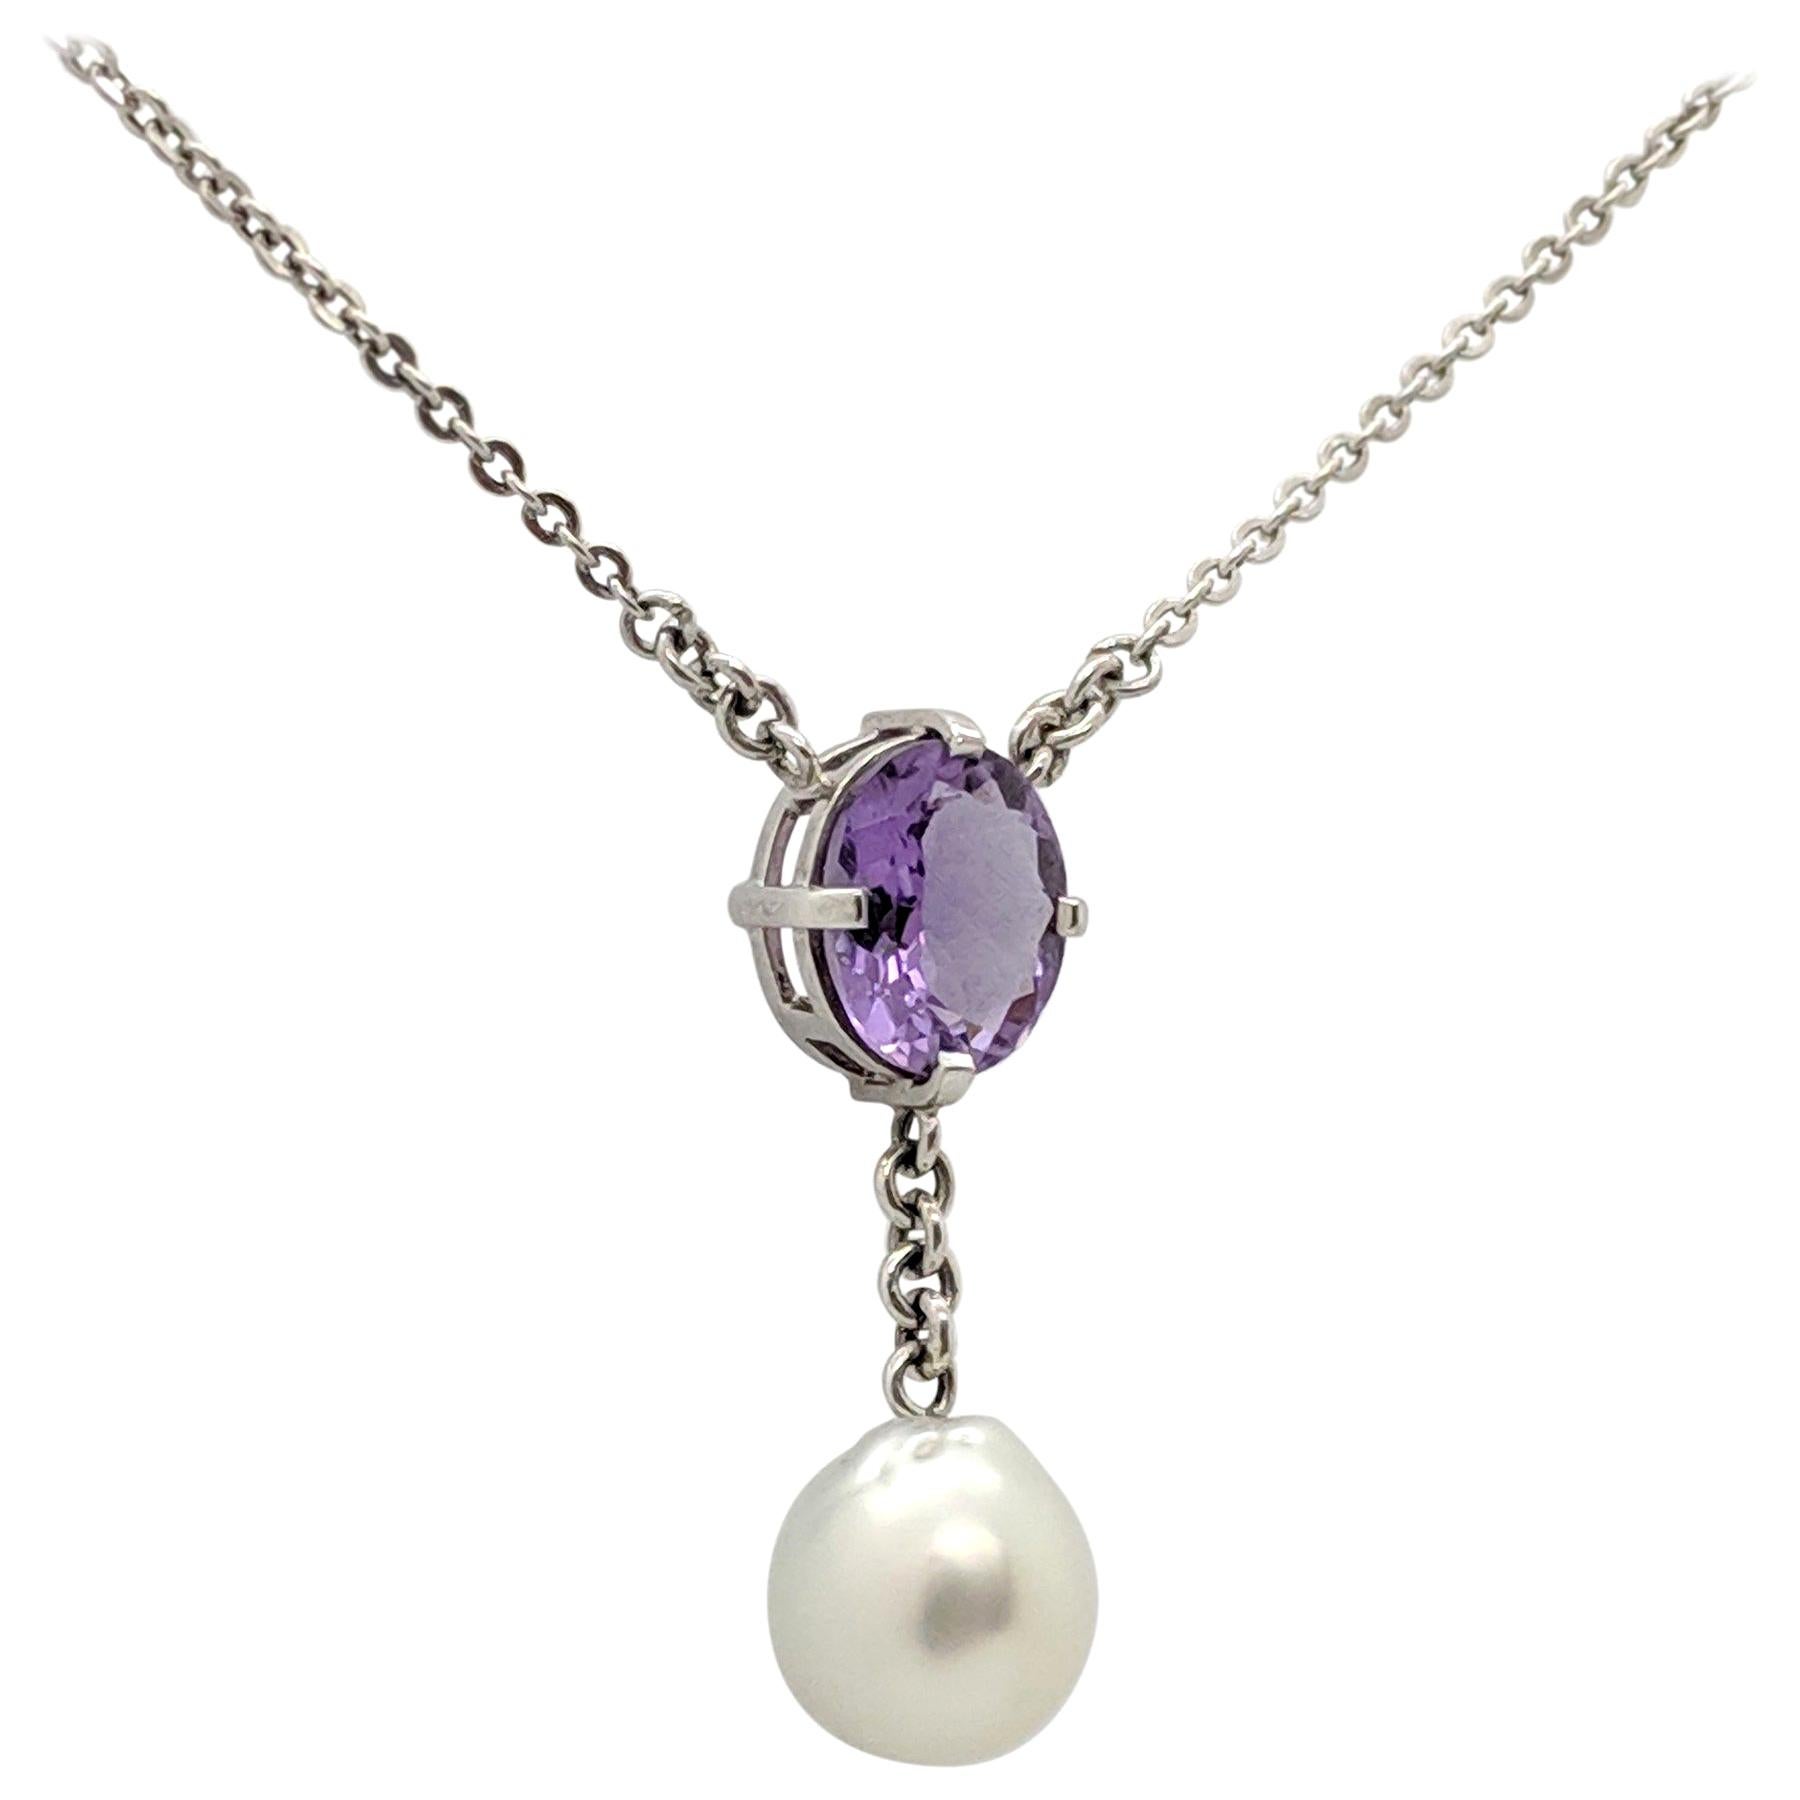  2.57 Carat Oval Cut Amethyst and South Sea Pearl Necklace 18 Carat White Gold For Sale